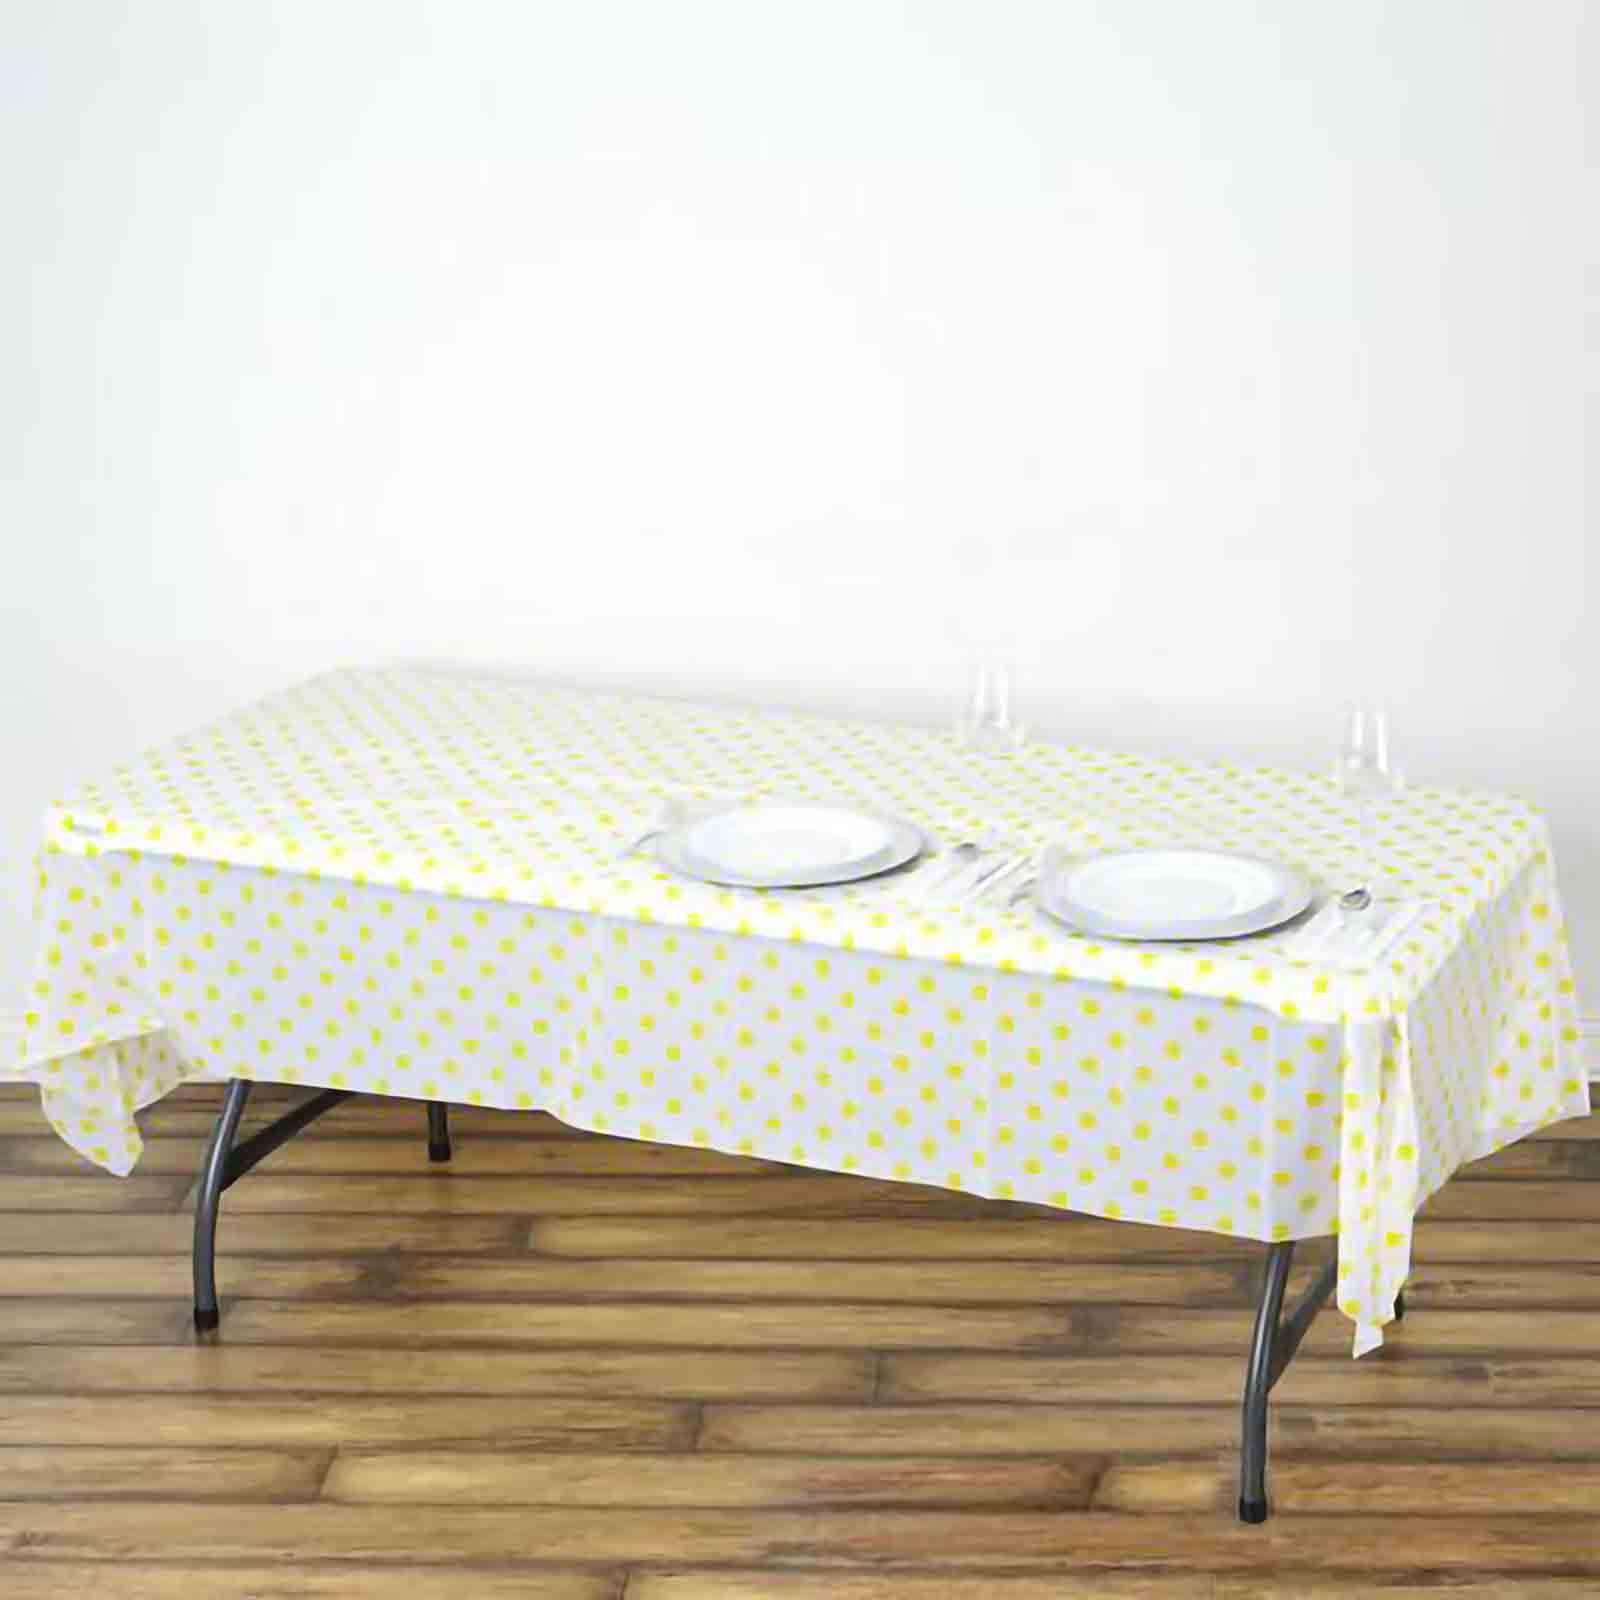 54x108 inch Polka Dots Disposable Plastic Table Cover Rectangular Tablecloth